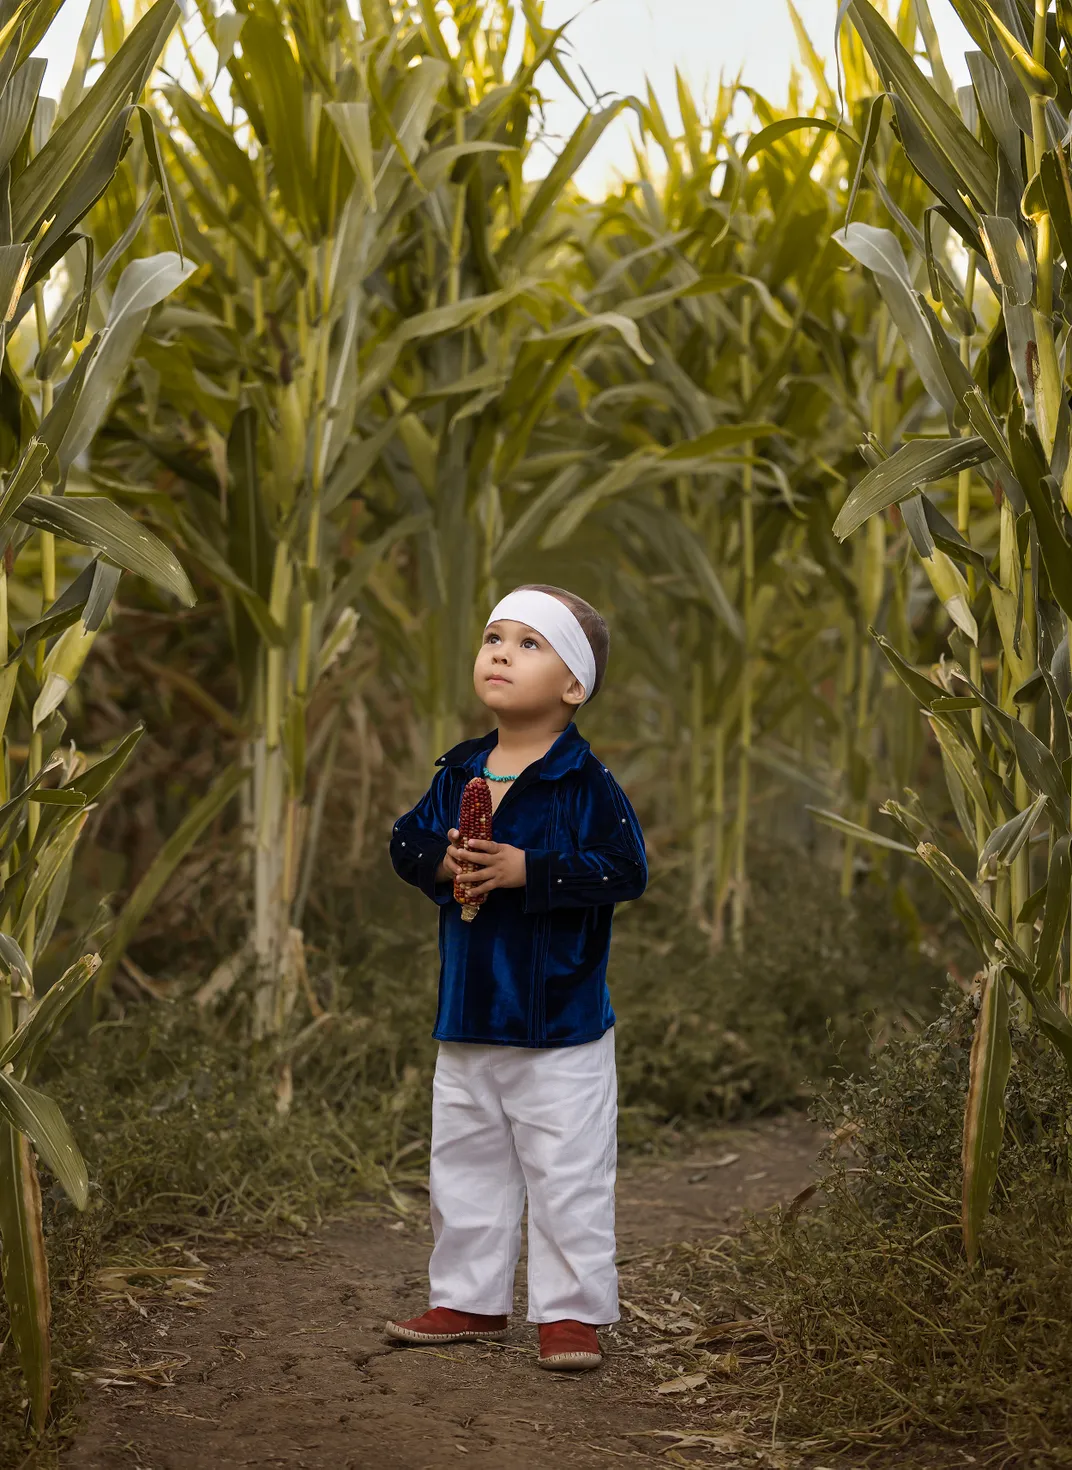 A young Navajo boy, wearing traditional beads and moccasins, gazes up at towering stalks of corn